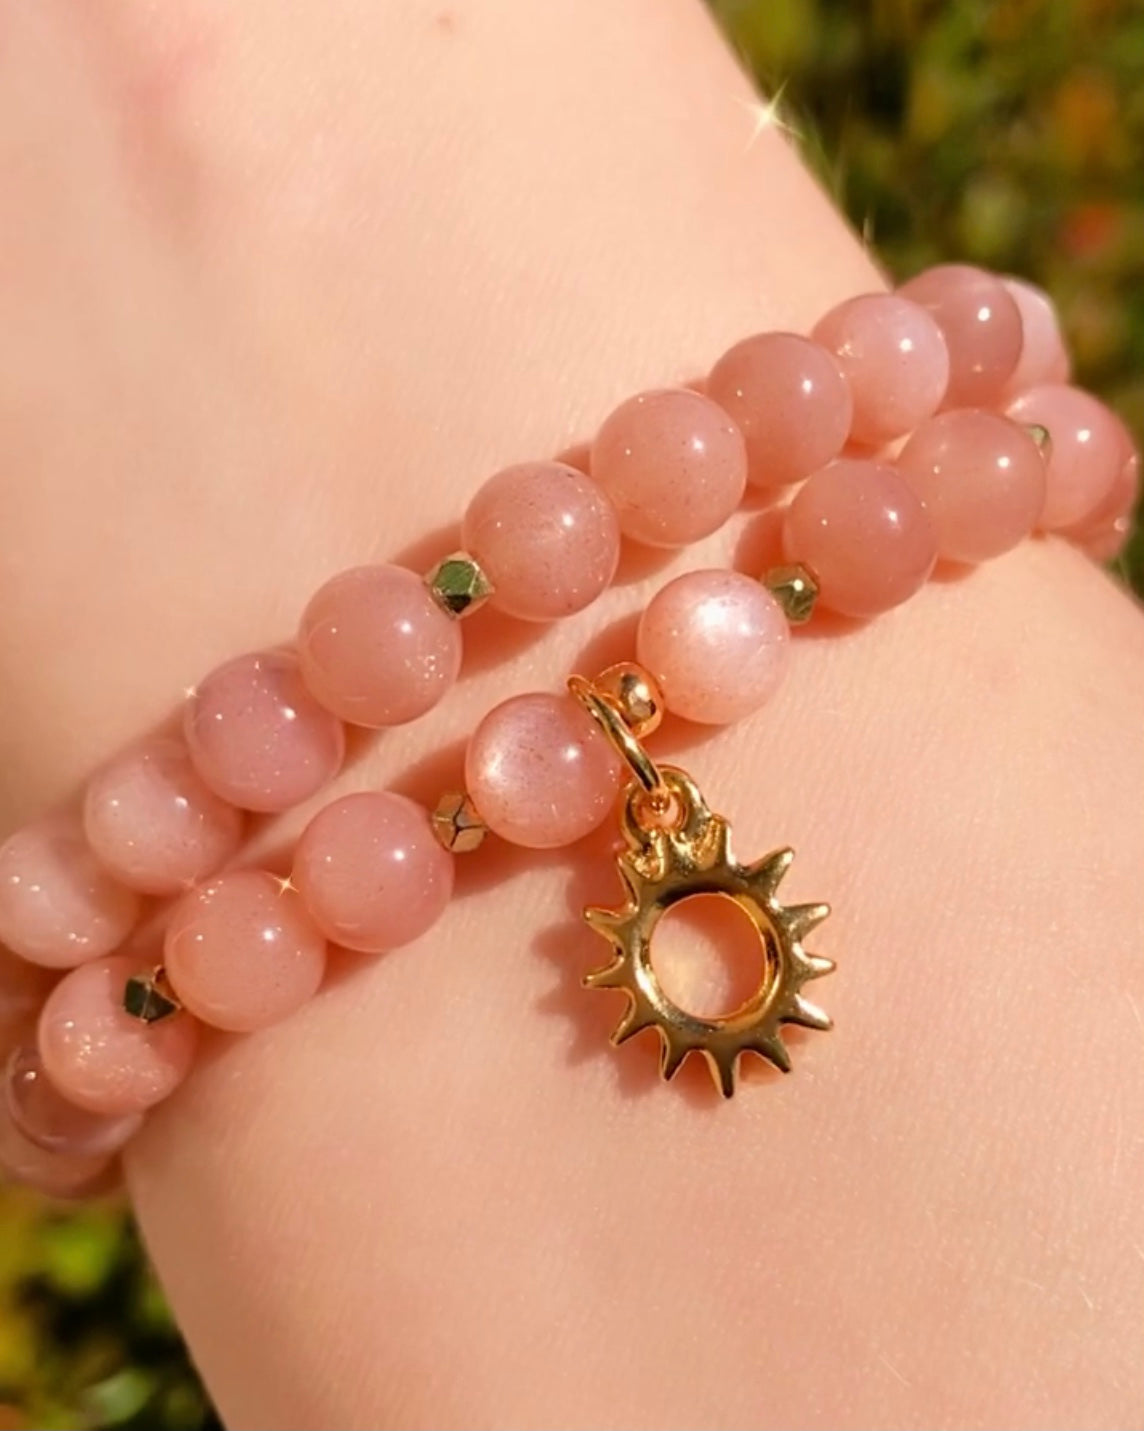 Sparkly Sunstone Bracelet with gold Radiant Sun Pendant, crystal healing jewelry